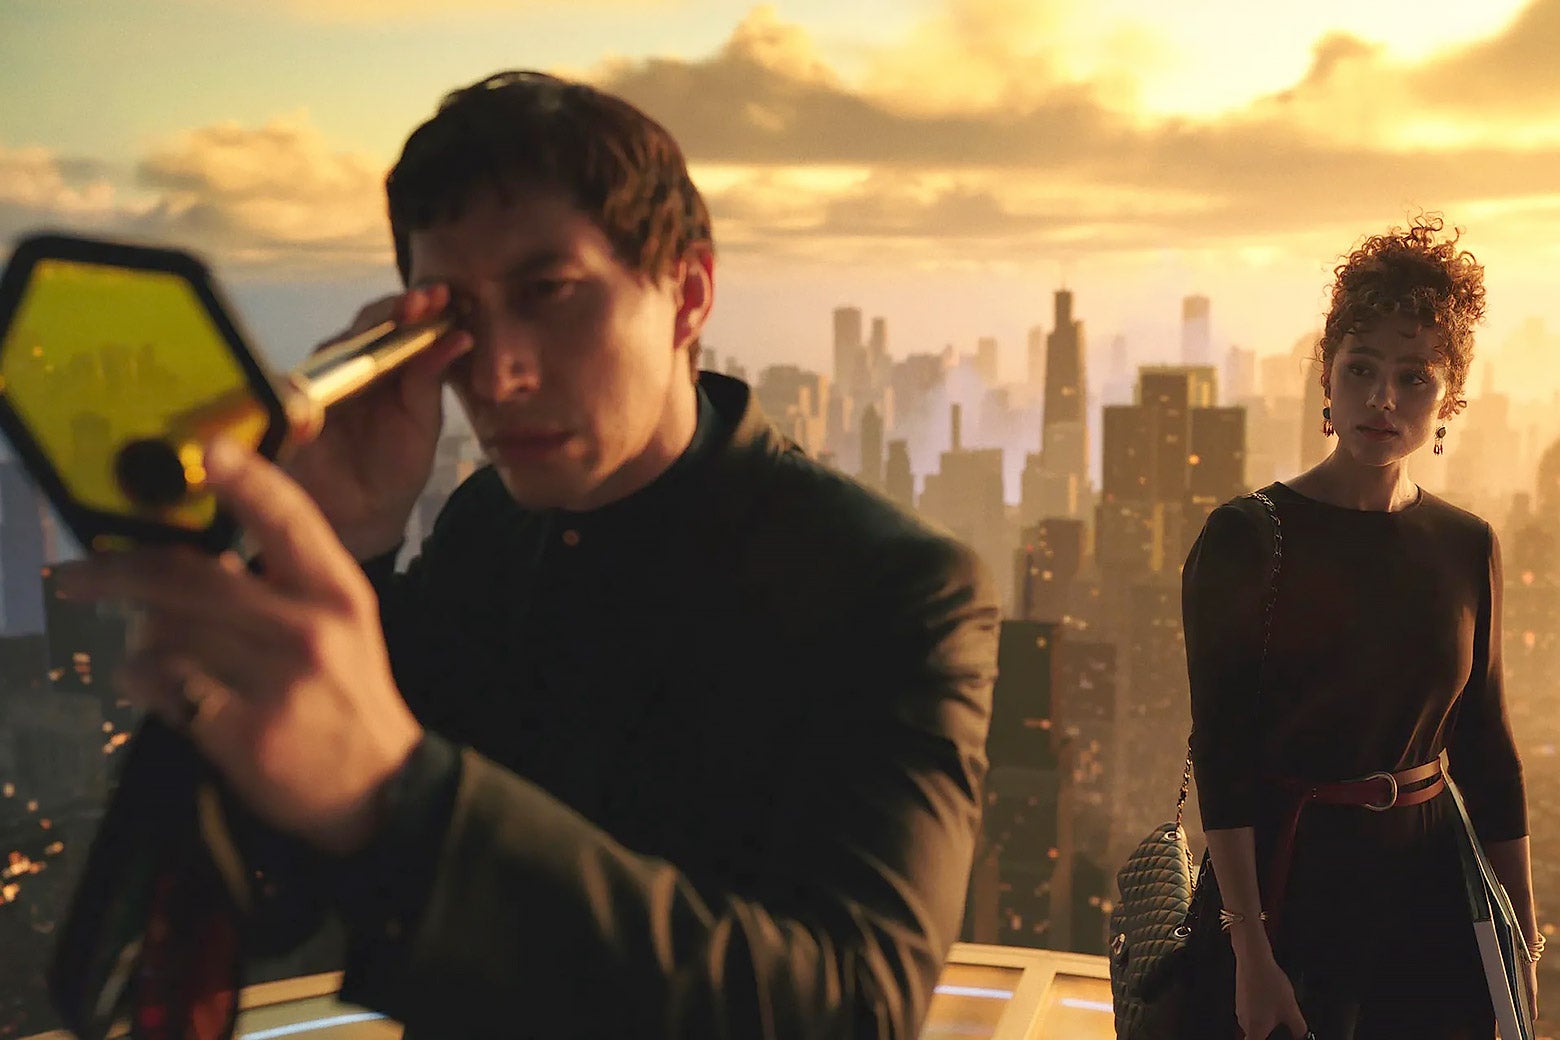 Driver, wearing a suit, looks through a tiny golden telescope at the top of a futuristic cityscape. Behind him, Emmanuel, looking elegant in a black dress, looks on.